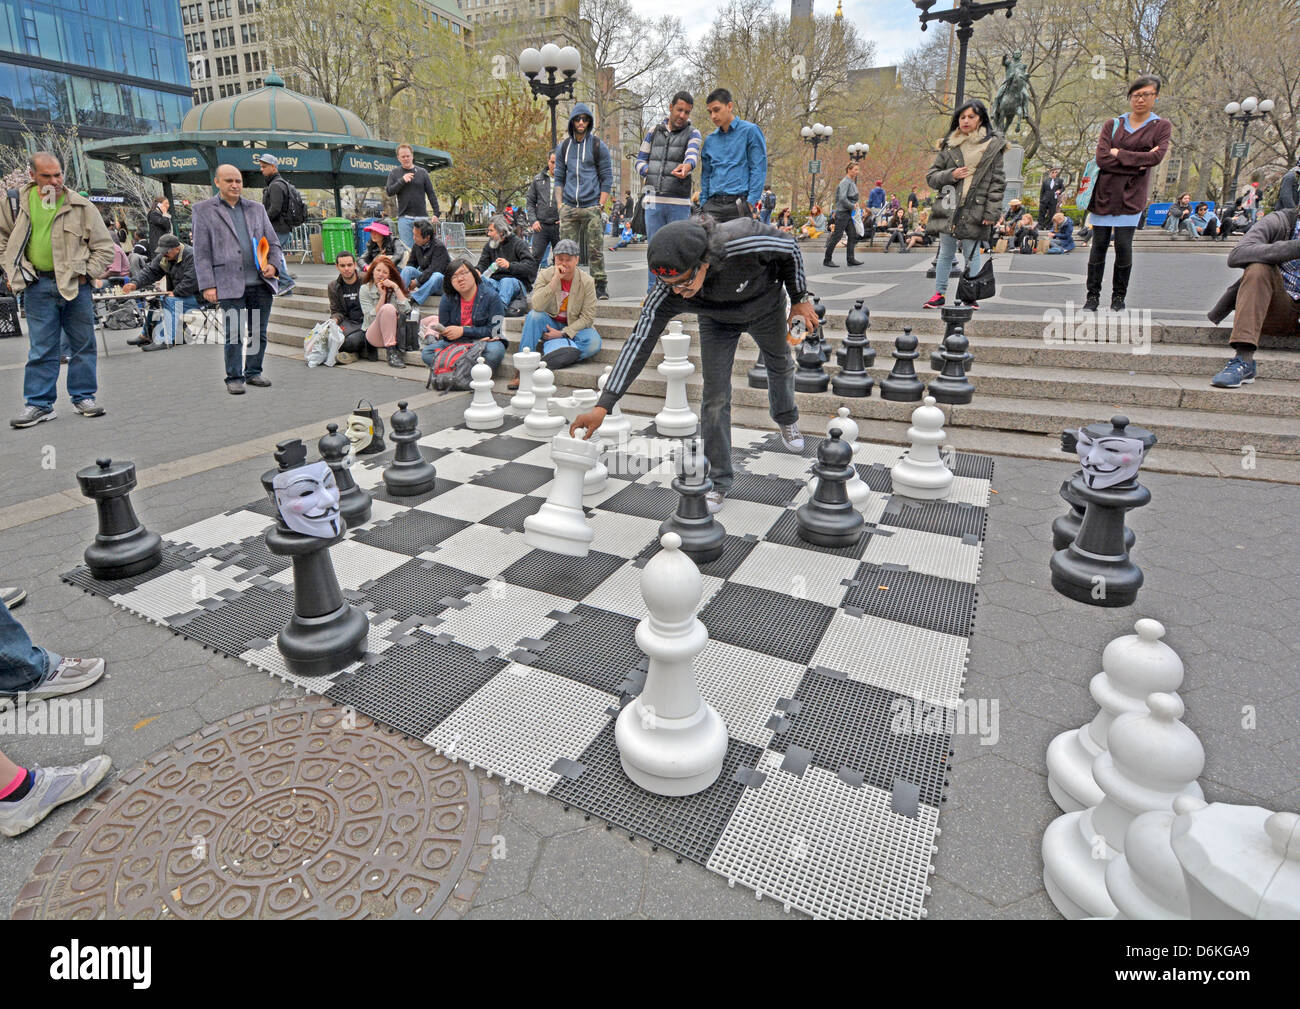 Chess game in Union Square Park in New York City played with life size pieces Stock Photo